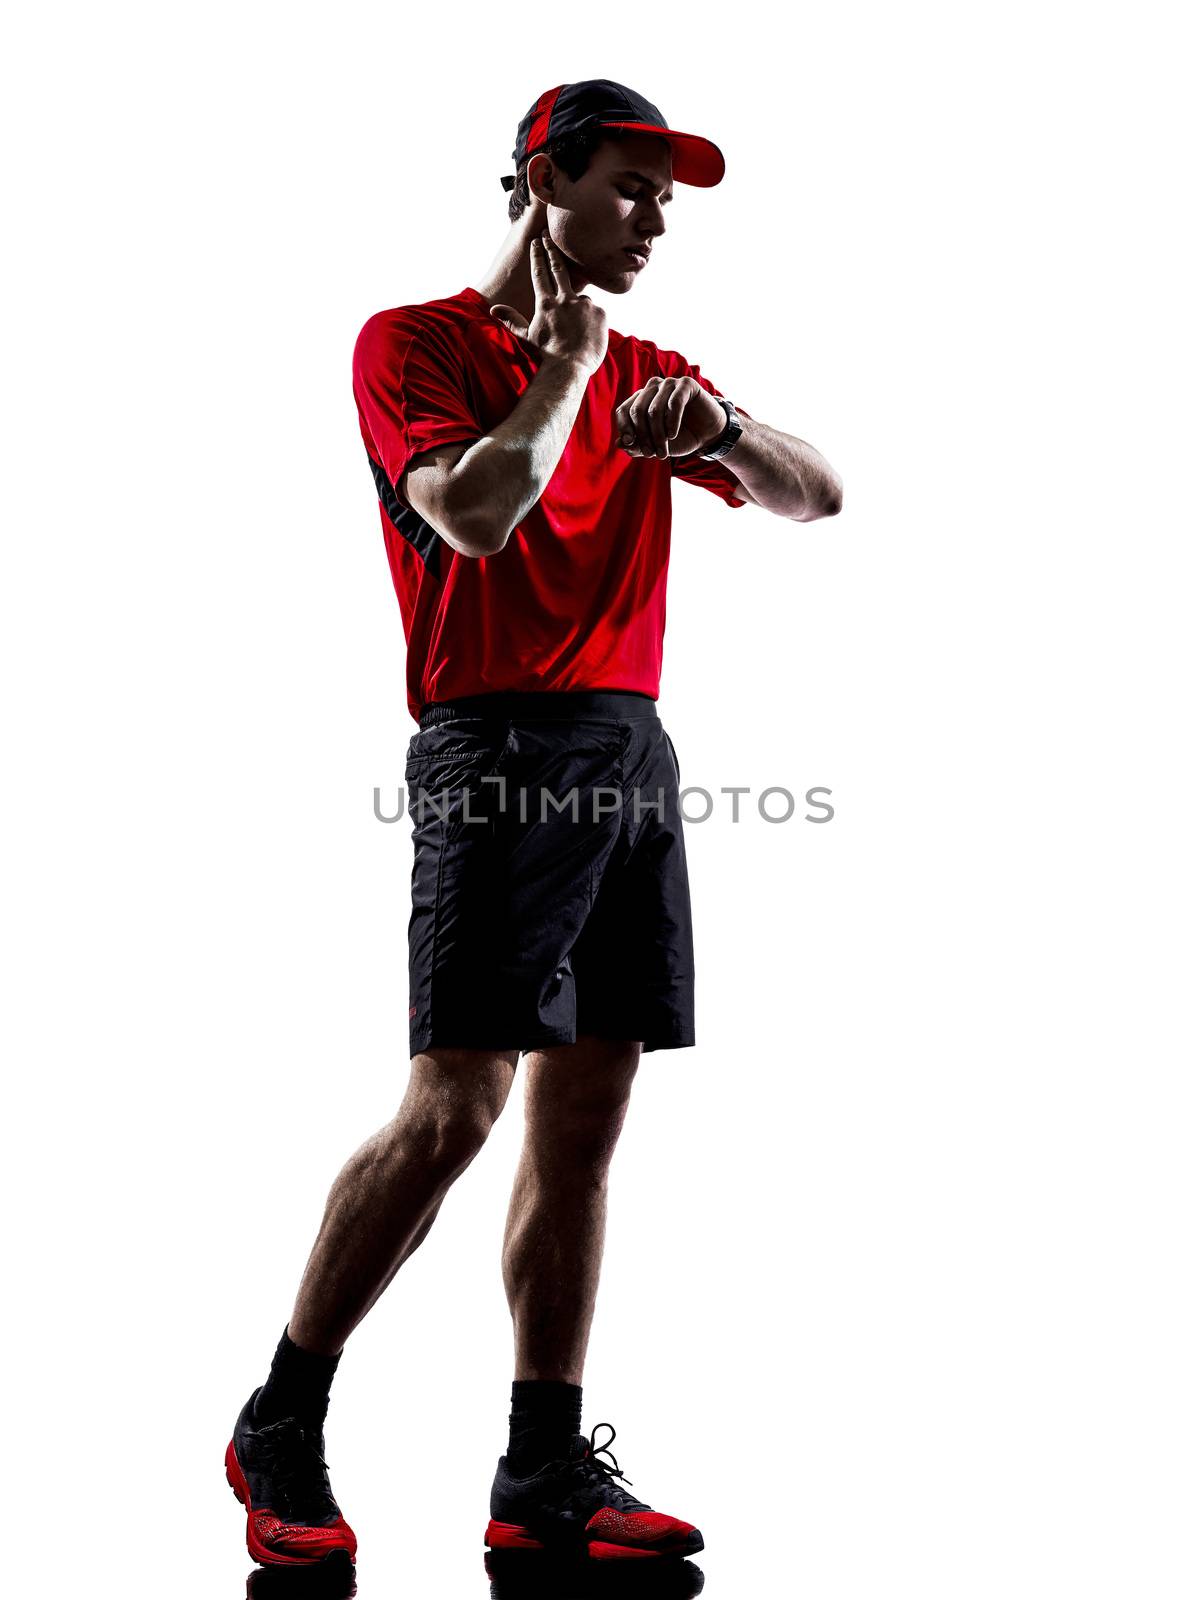 one young man runners joggers taking heartbeat pulse in silhouettes isolated on white background